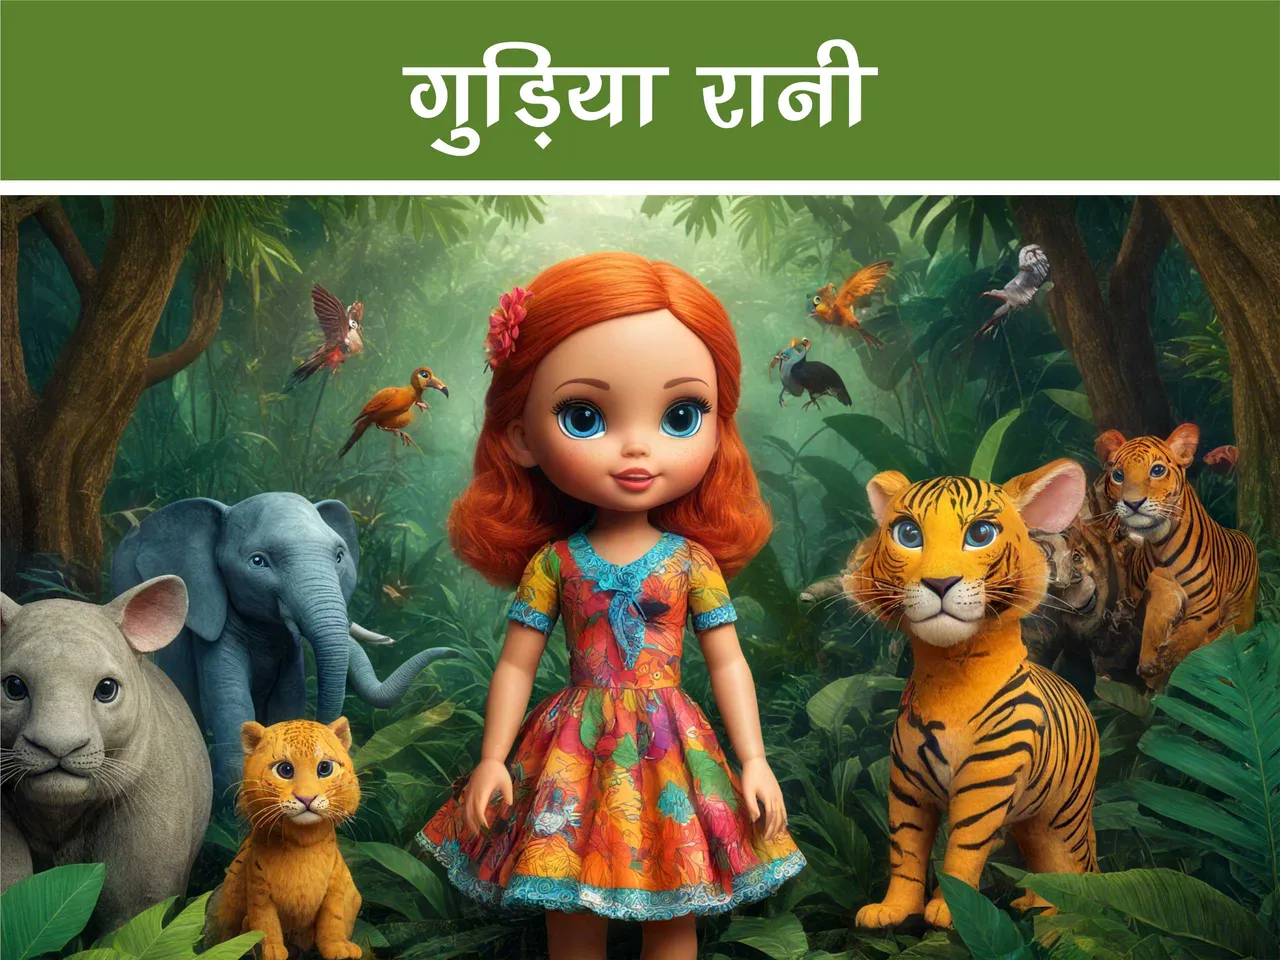 Cartoon image of a doll in jungle